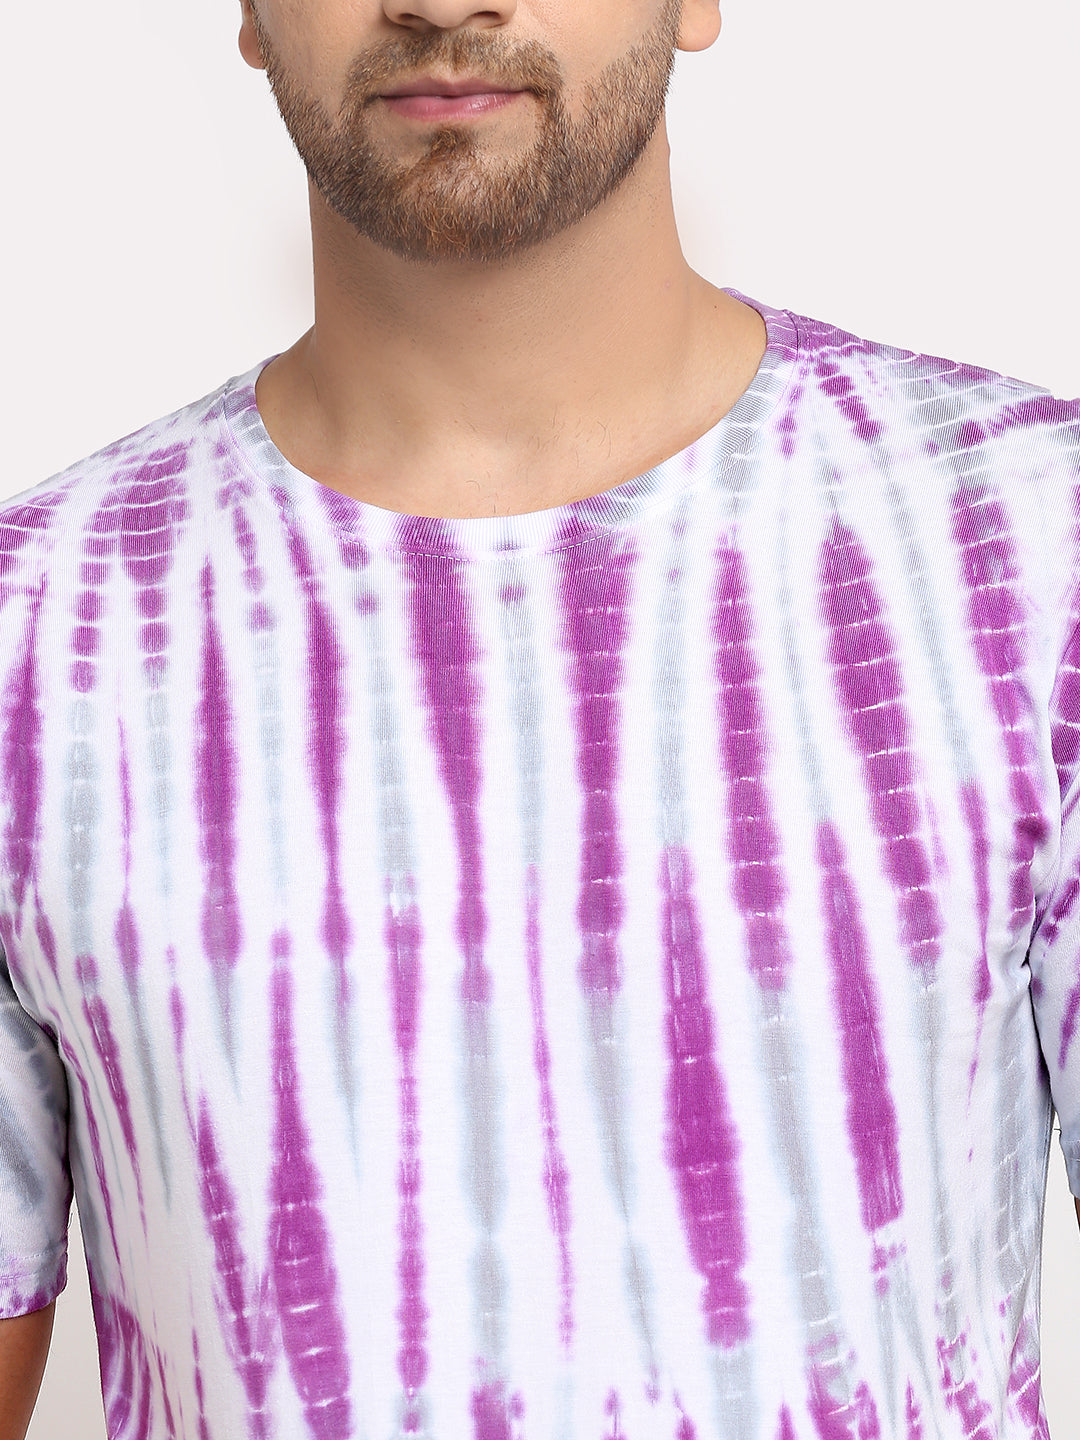 Men's Tie Dyed Faded Grey t shirt